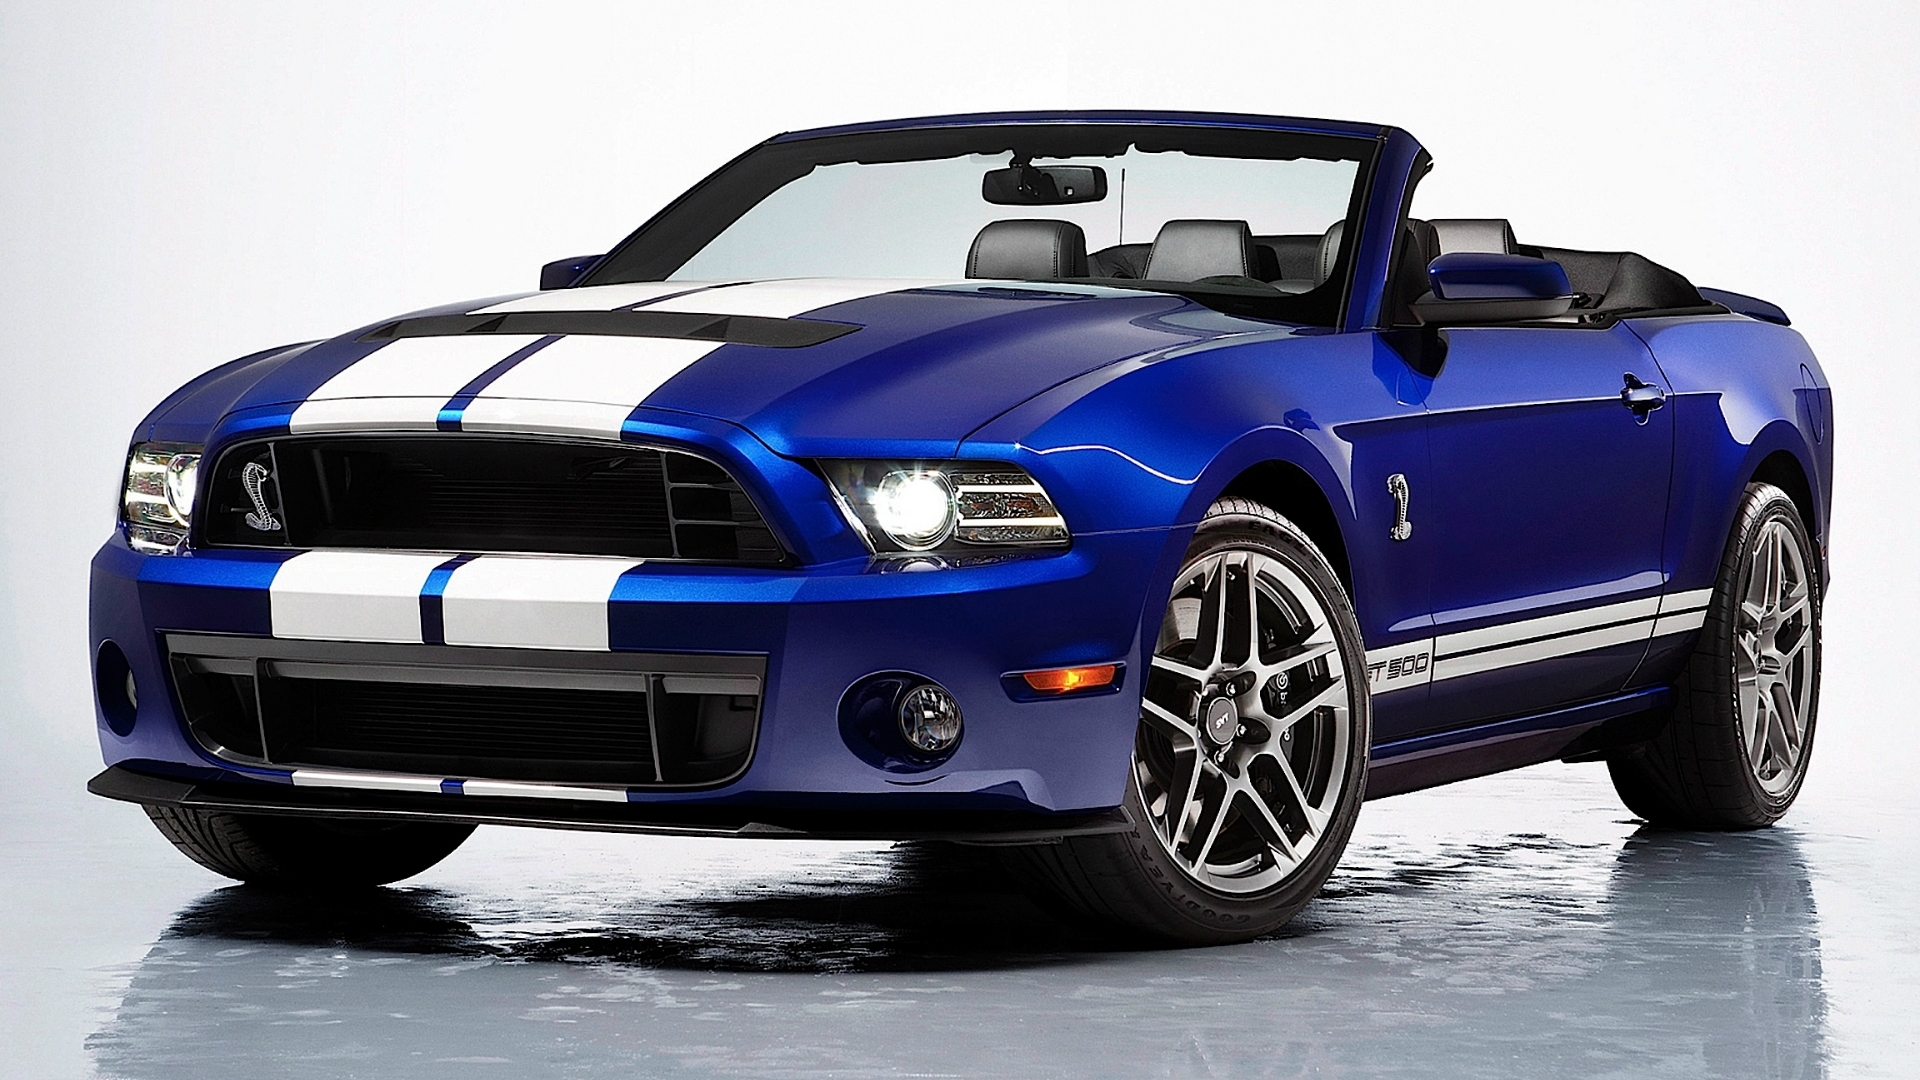  Ford Mustang Shelby Gt Nice Cars Wallpaper Full HD Wallpapers